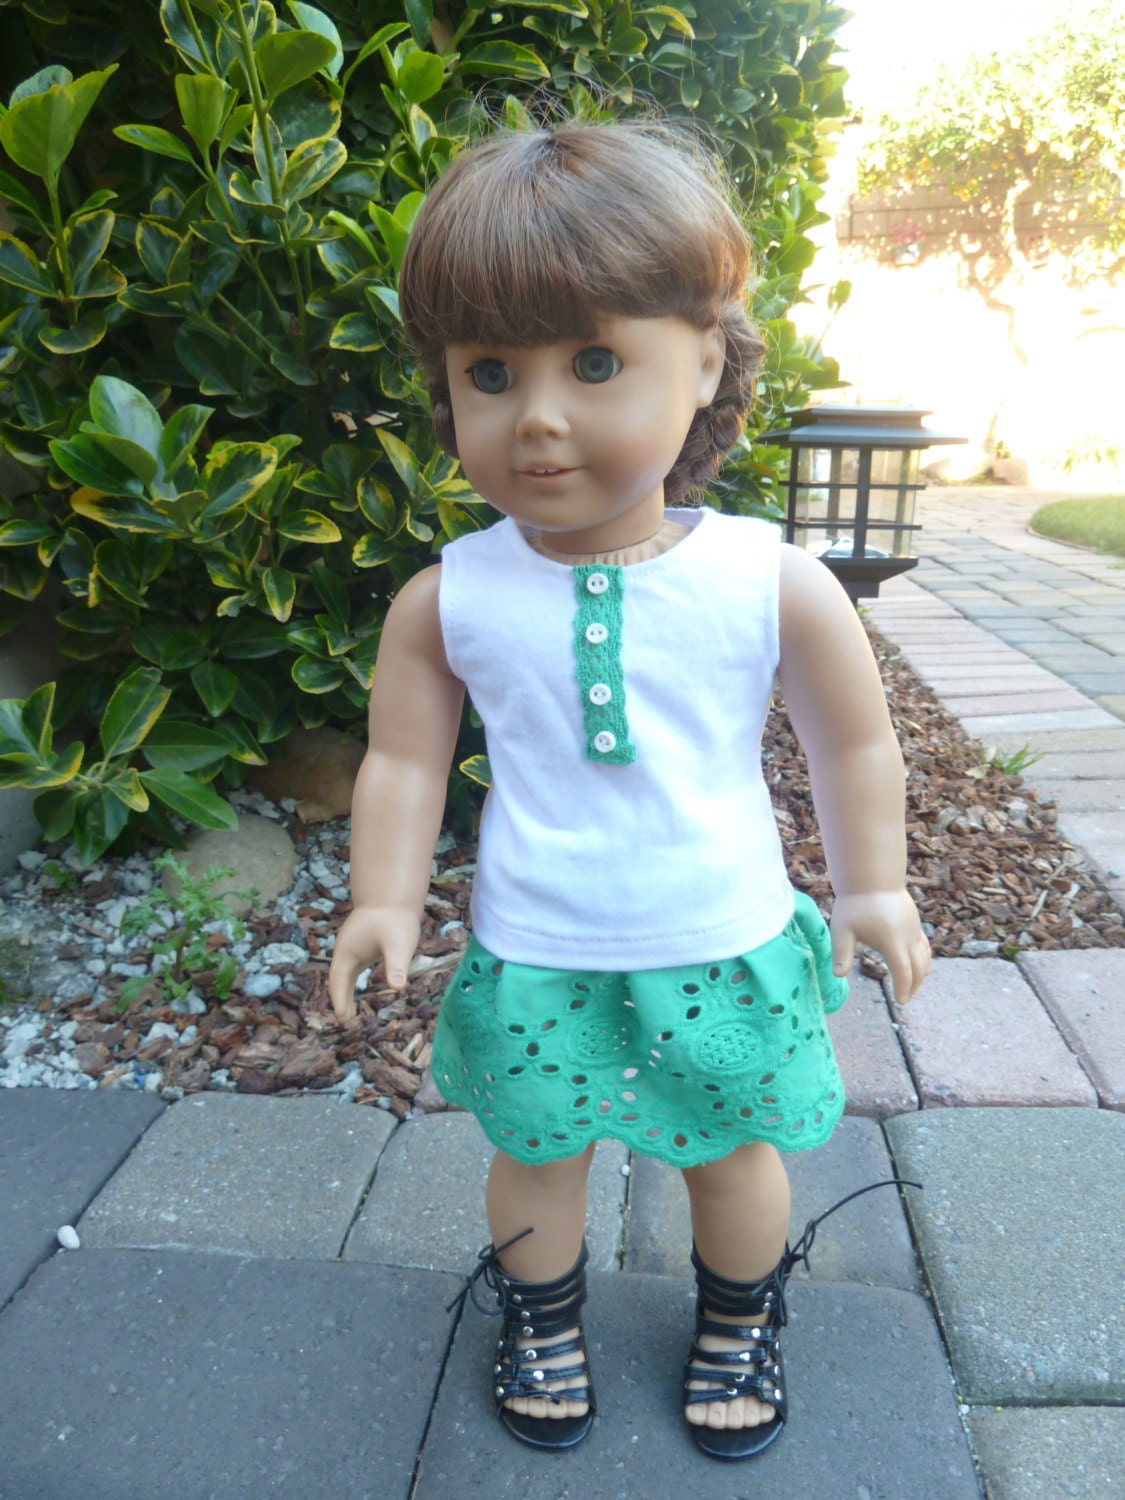 American Girl Doll Clothes - Blarney Castle 2 piece outfit includes tank top and embroidered skirt